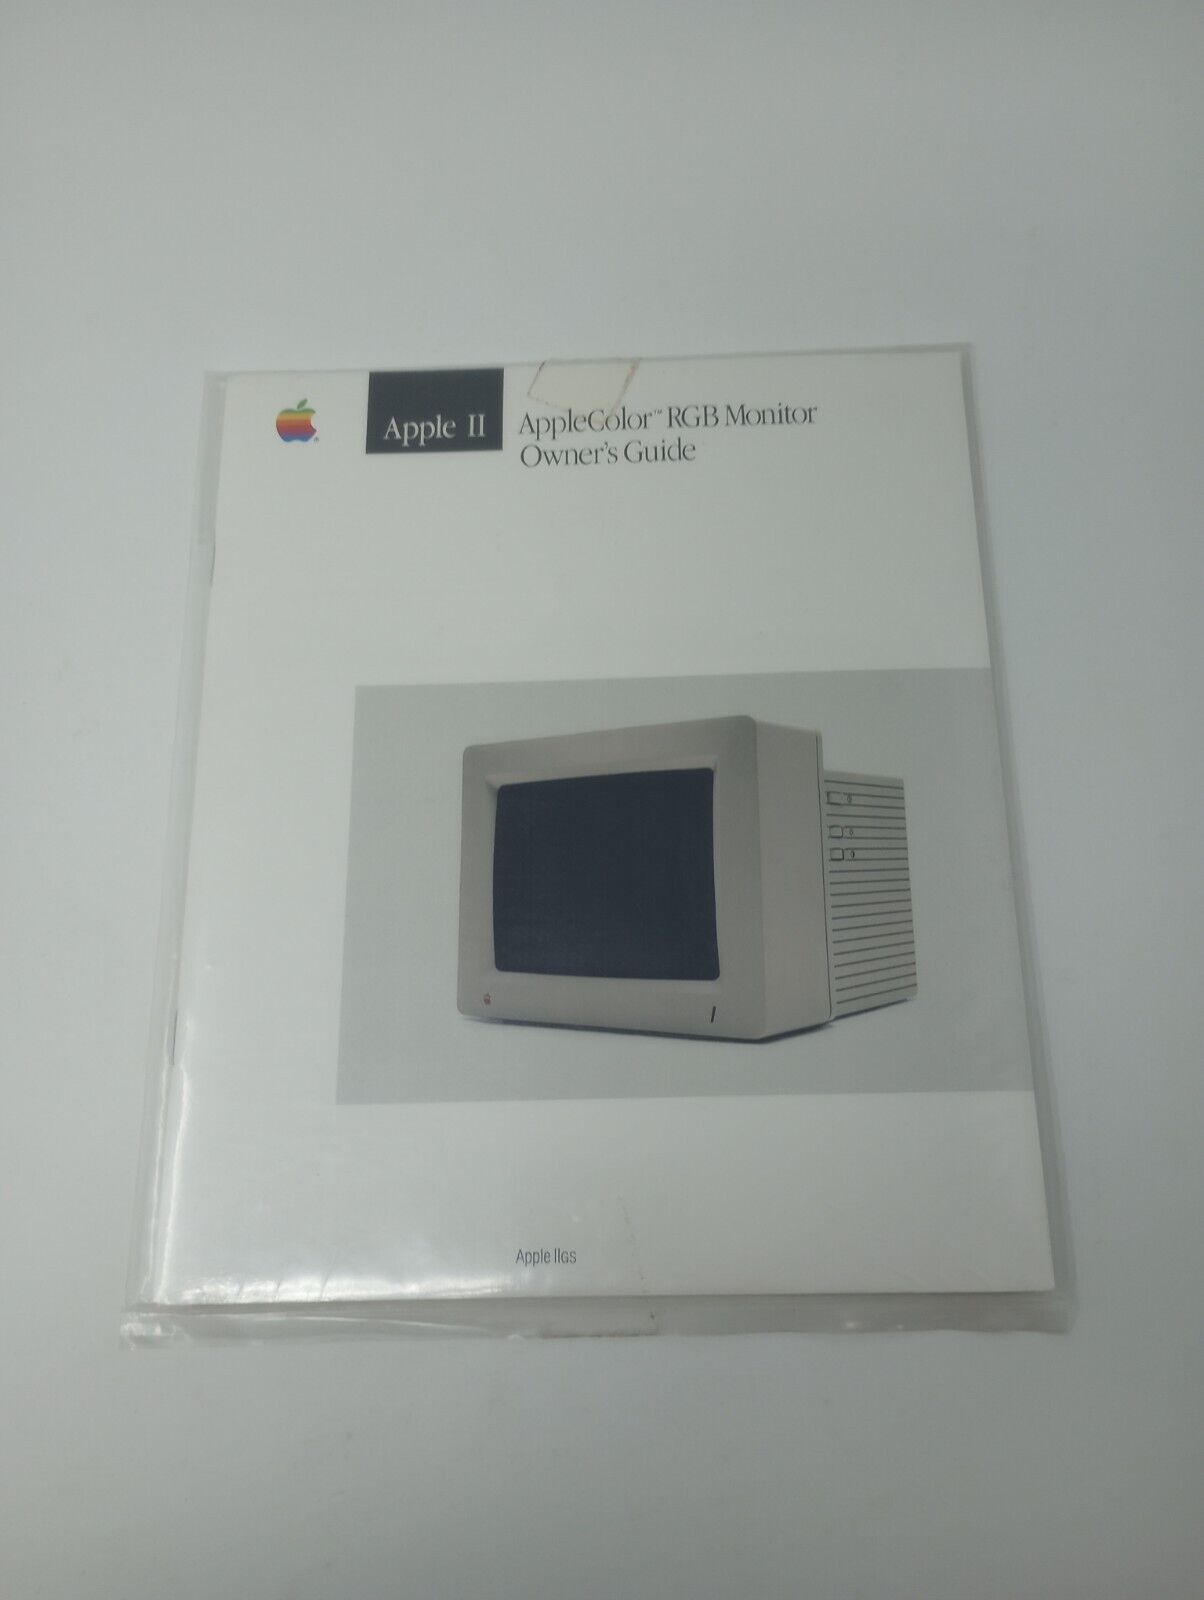 Vintage Apple IIGS AppleColor RGB Monitor Owner's Guide Complete w/Inserts NEW 